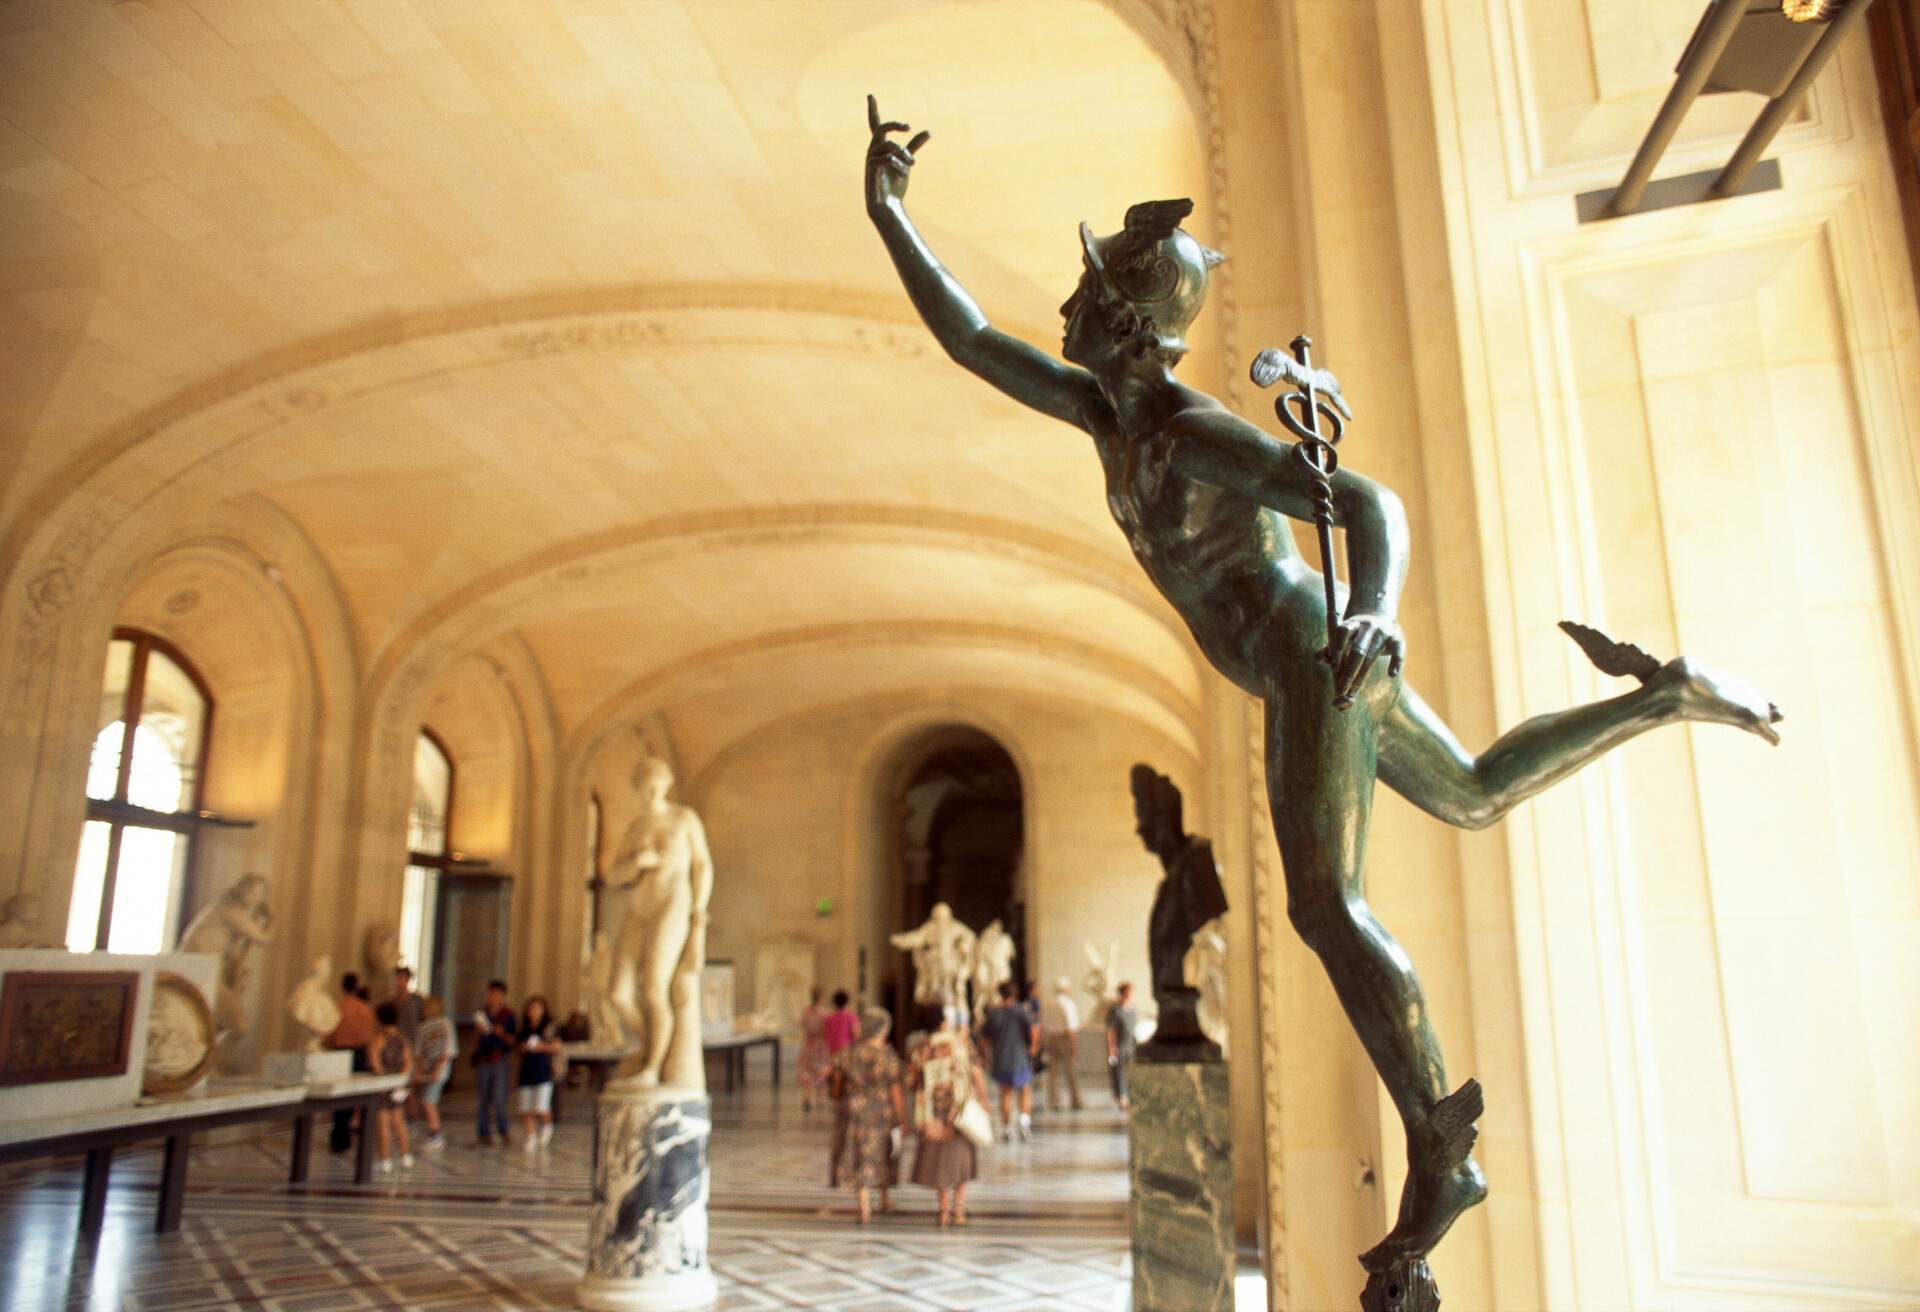 Statue of the Greek god Mercury with a winged helmet, standing on one leg and holding a rod encircled by two snakes and tipped with wings, with the other hand pointing upward against a blurred background of people and other sculptures.